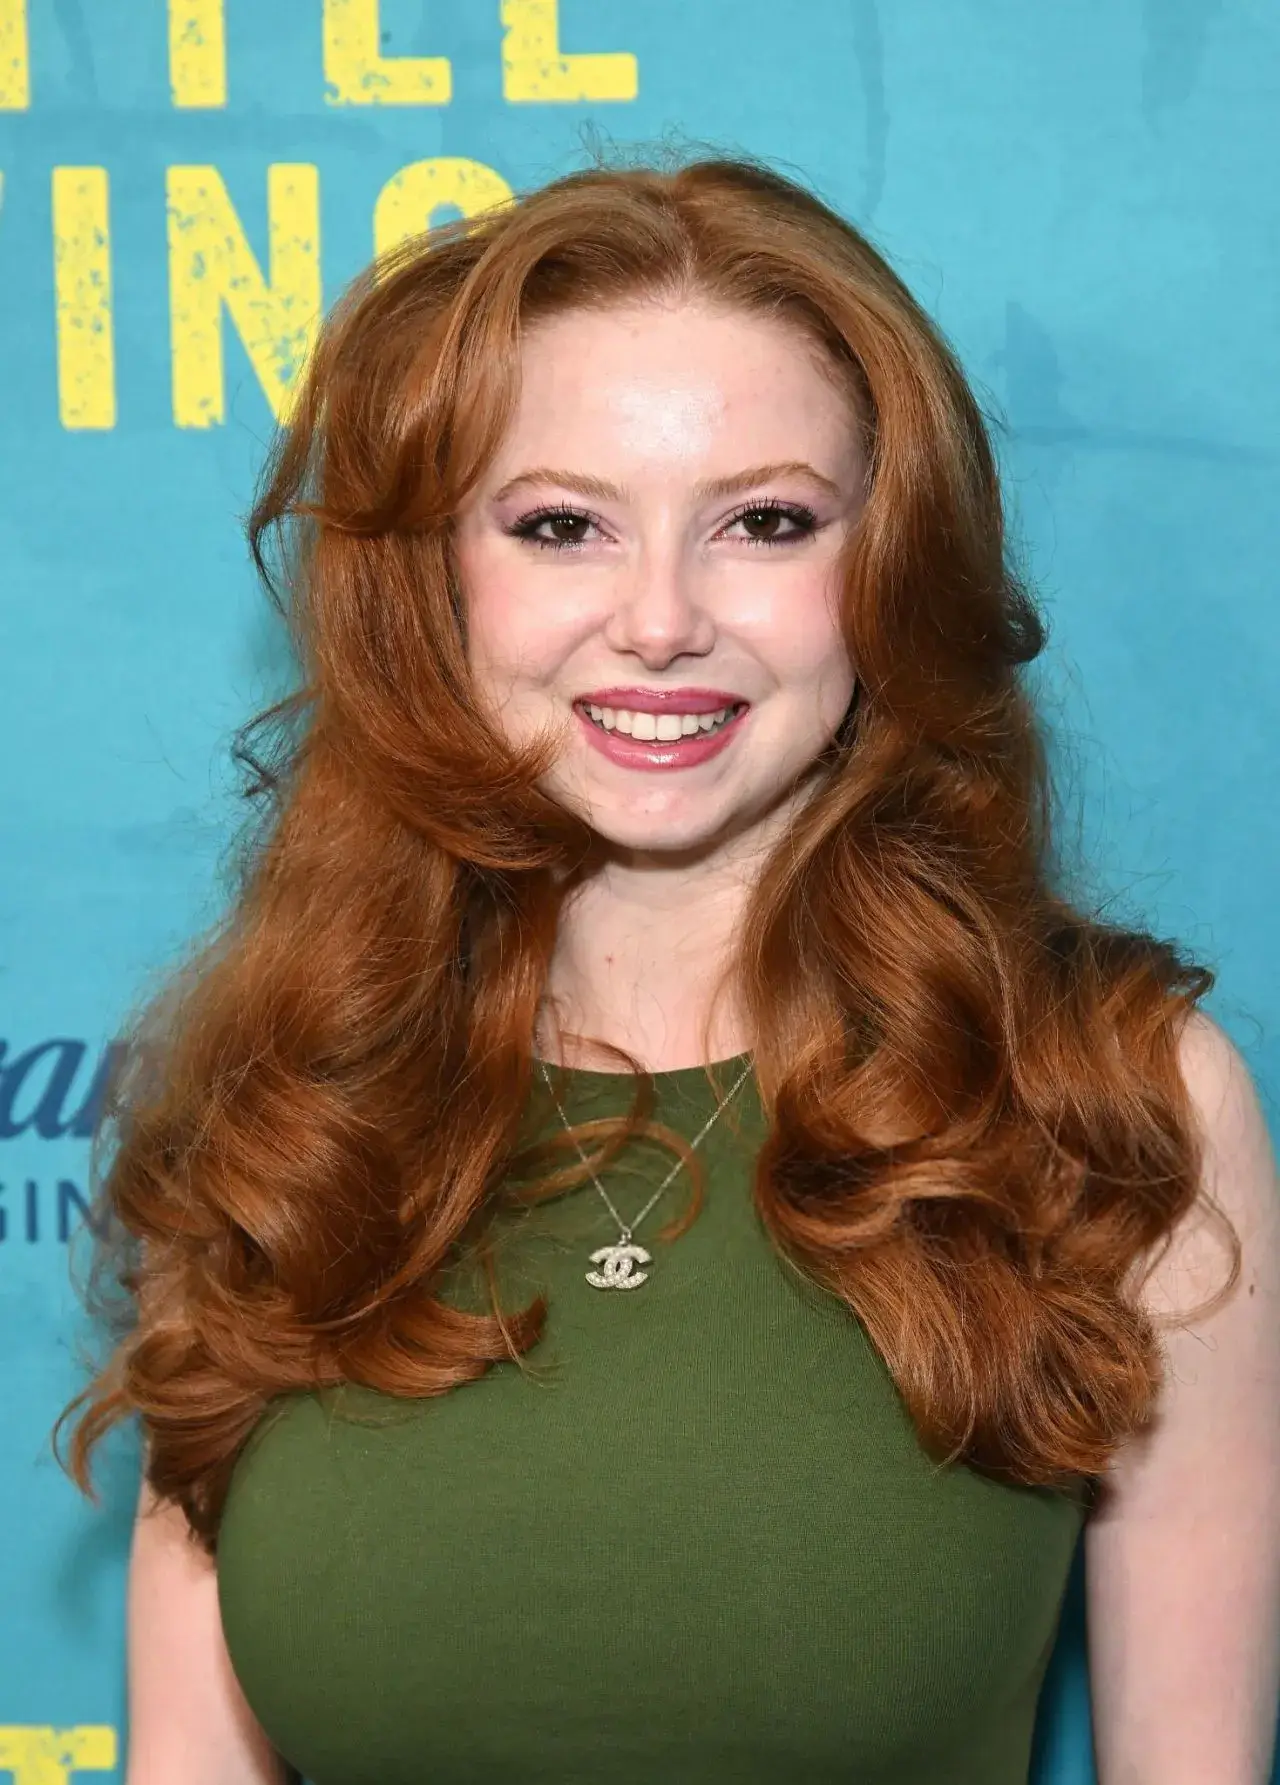 FRANCESCA CAPALDI AT LITTLE WING SCREENING EVENT AND RED CARPET